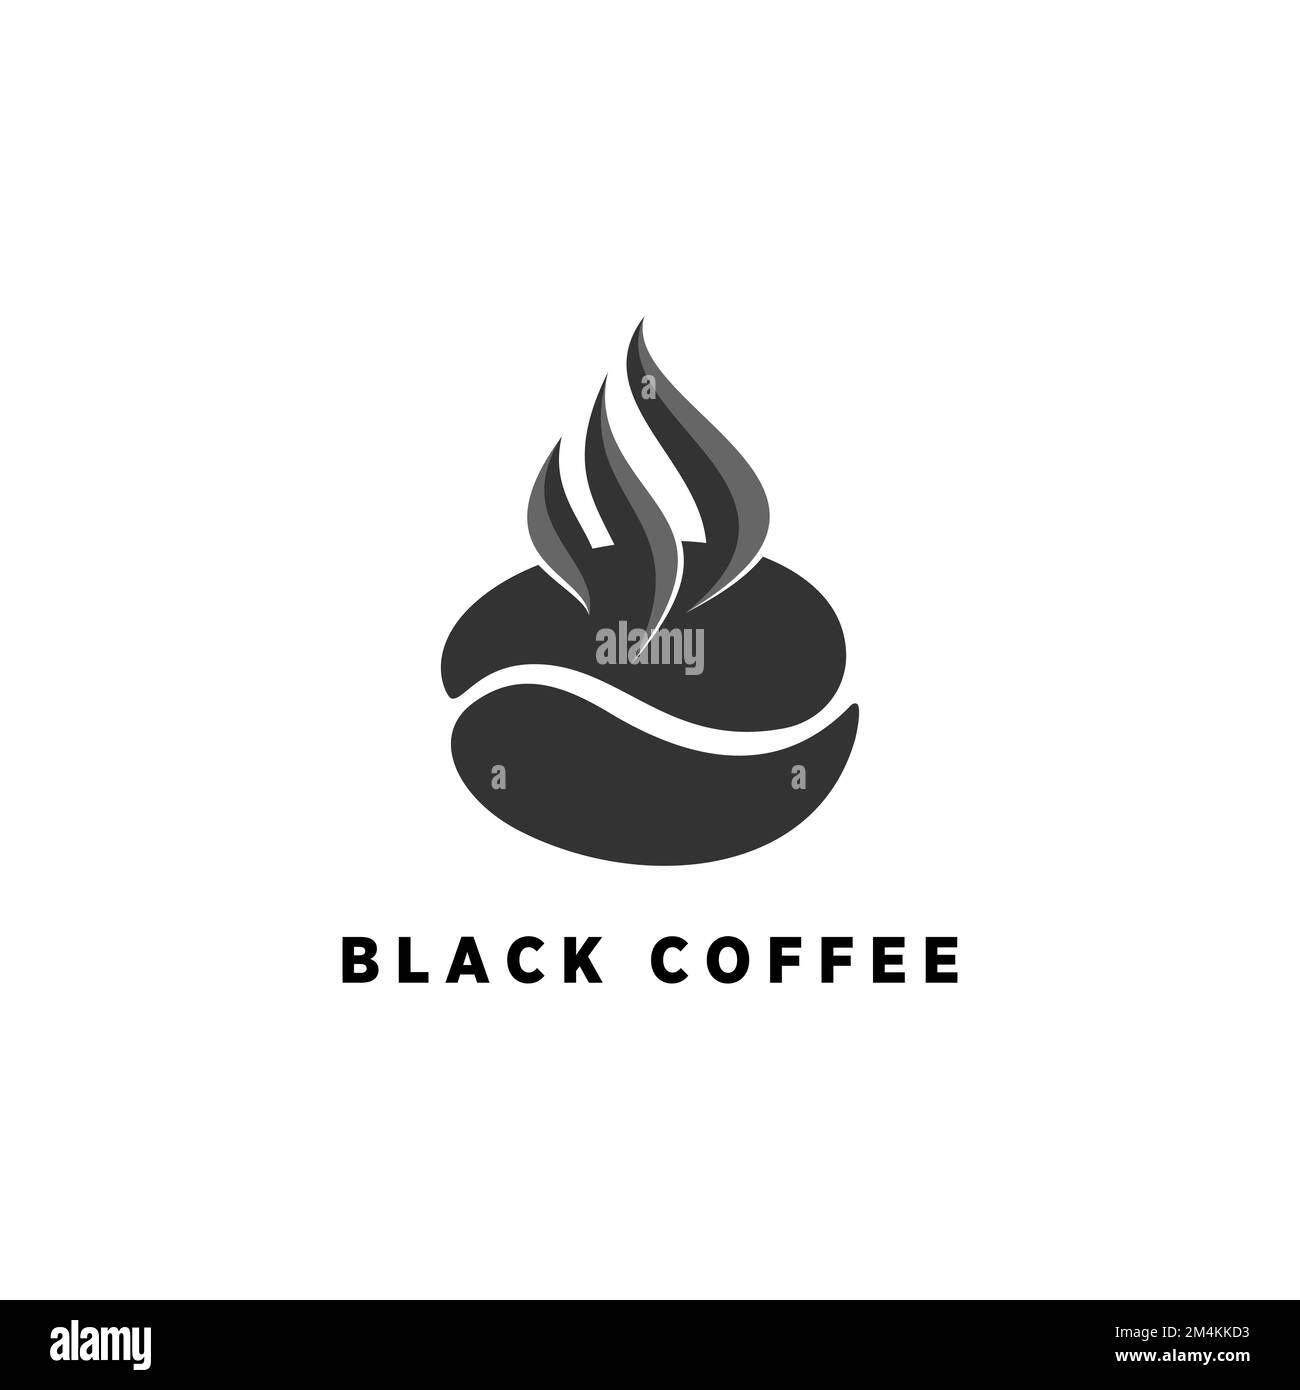 smoke or hot coffee bean shape Image graphic icon logo design abstract concept vector stock. Can be used as a symbol associated with drink or cafe. Stock Vector